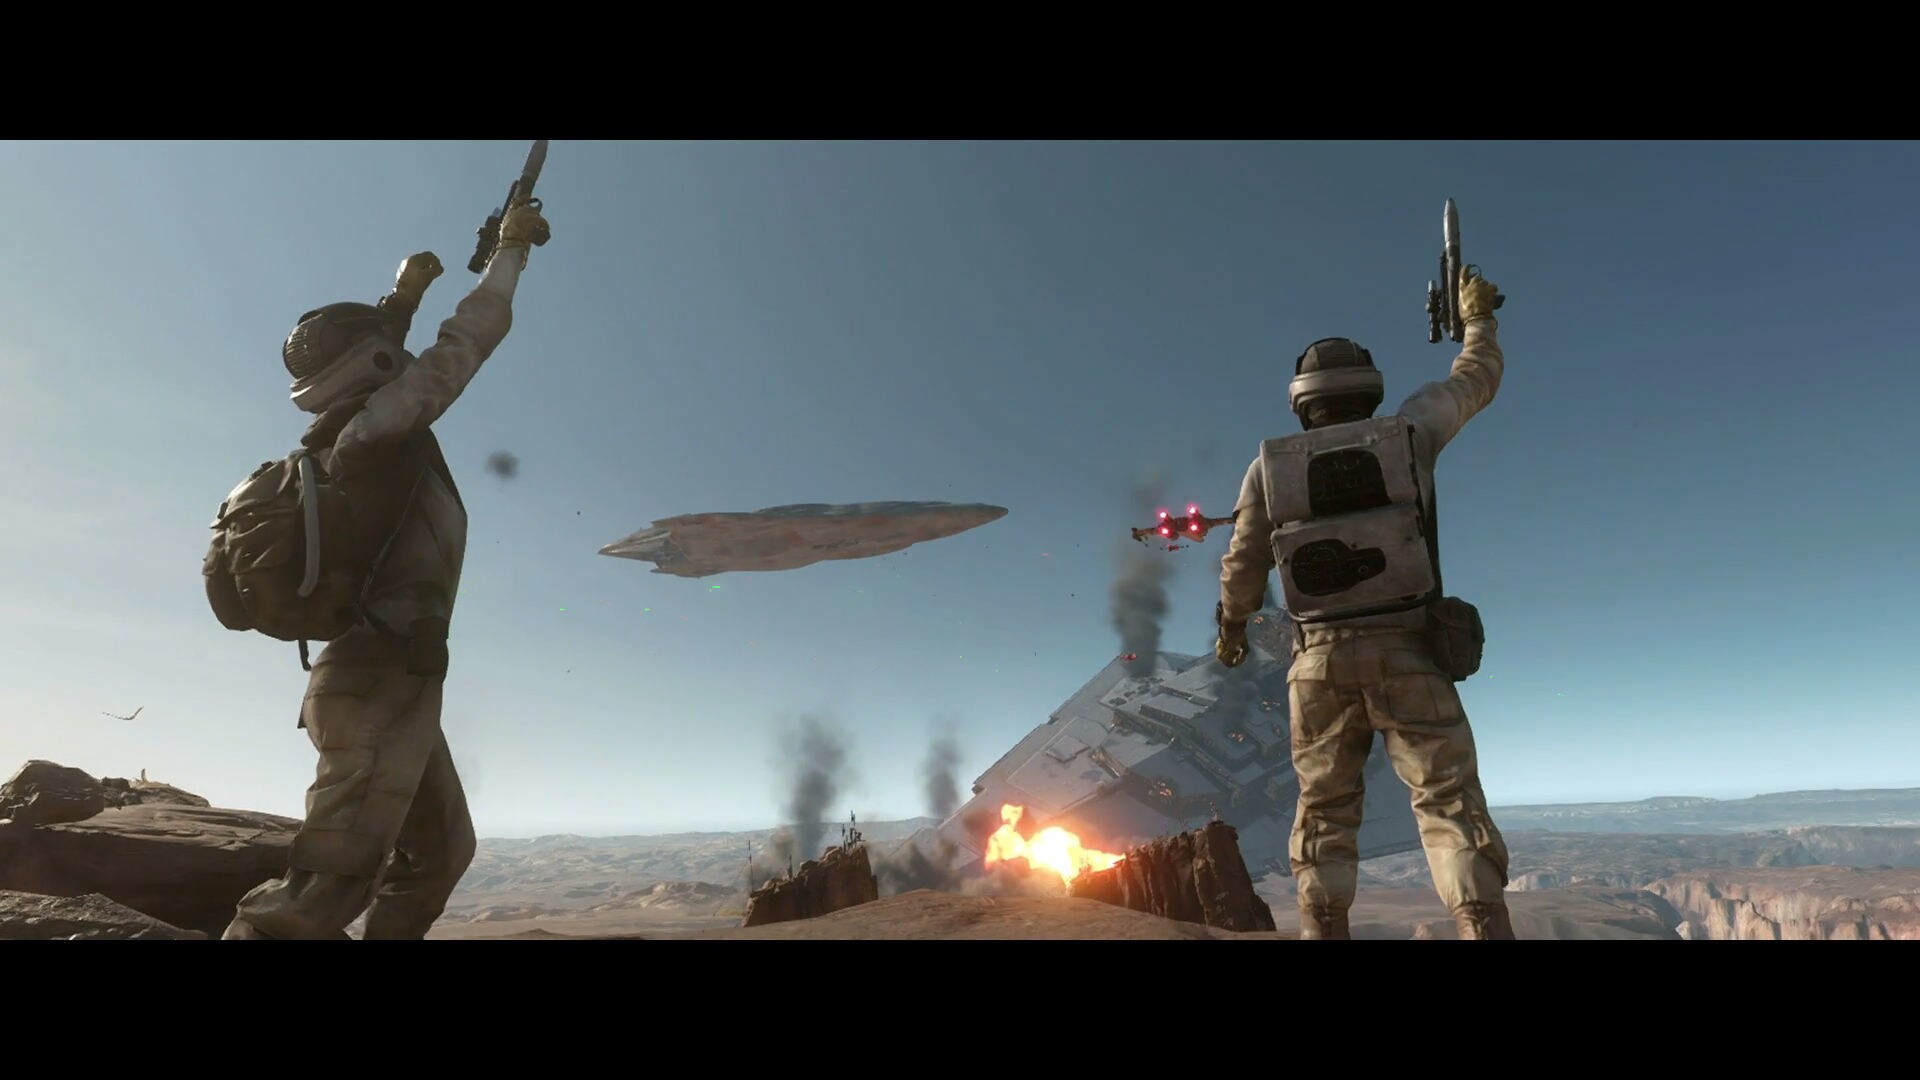 Star Wars Battlefront: Co-Op Missions Gameplay Reveal